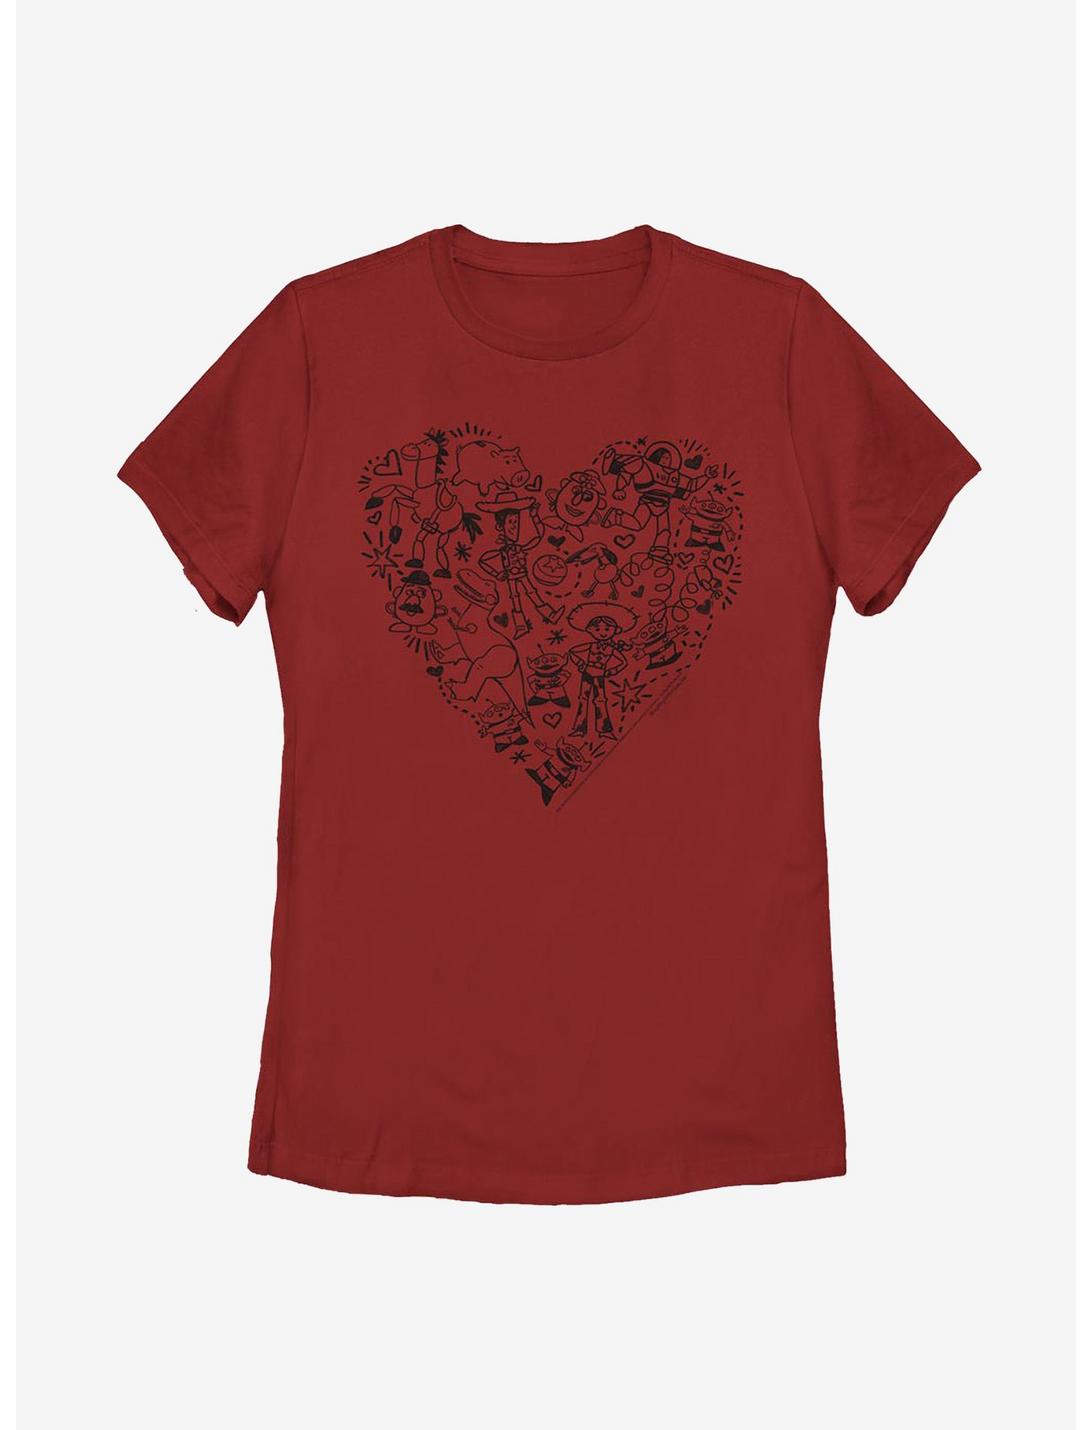 Disney Pixar Toy Story Group Doodle Heart Womens T-Shirt, RED, hi-res